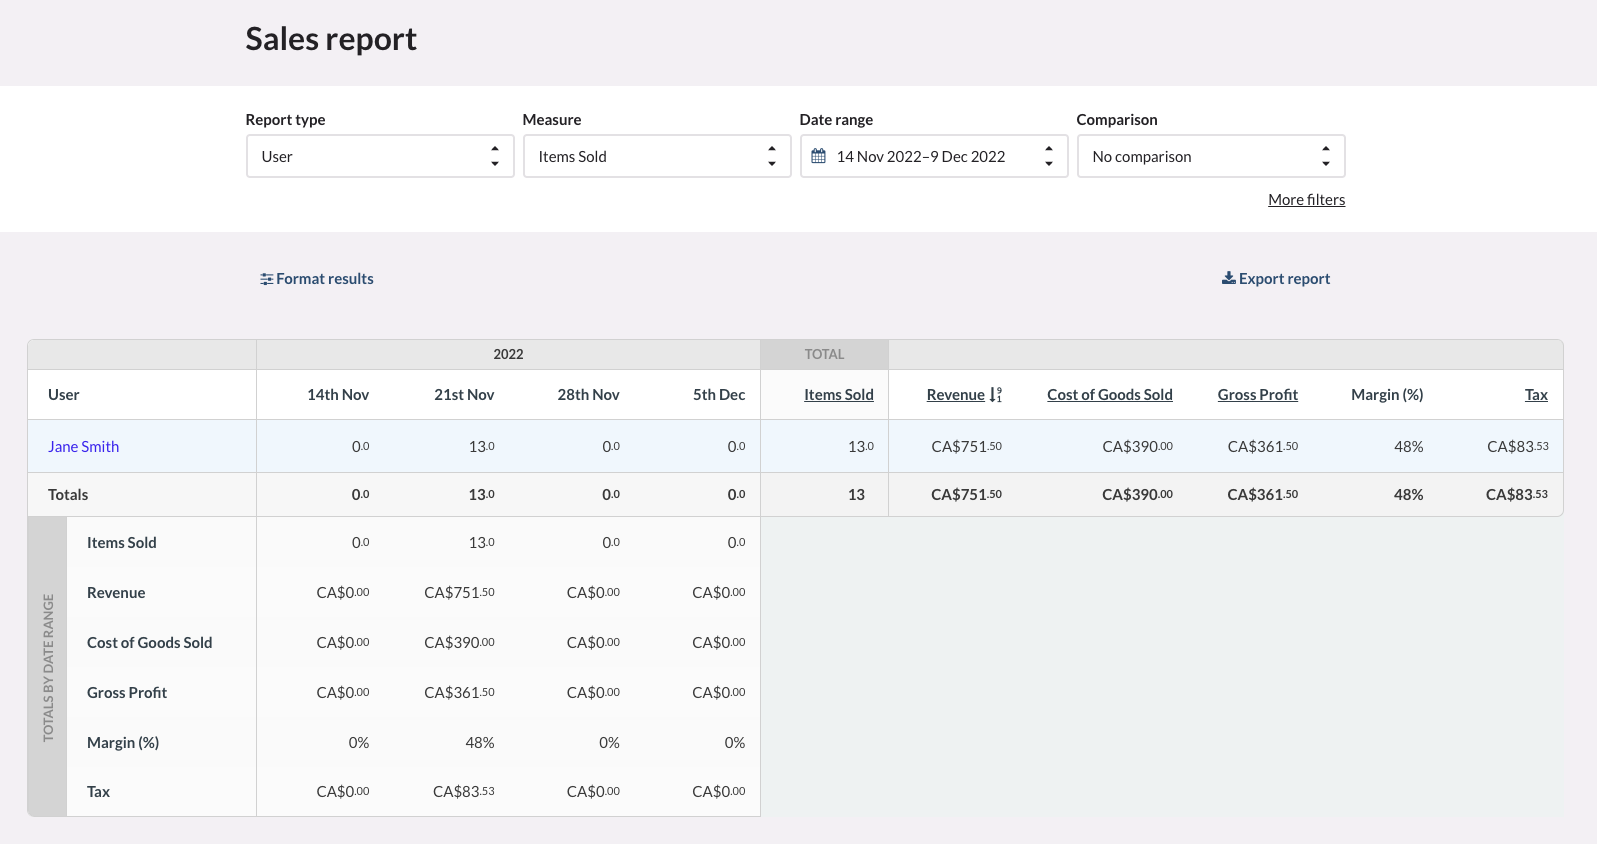 Sales report by user formatted to show sales totals only.